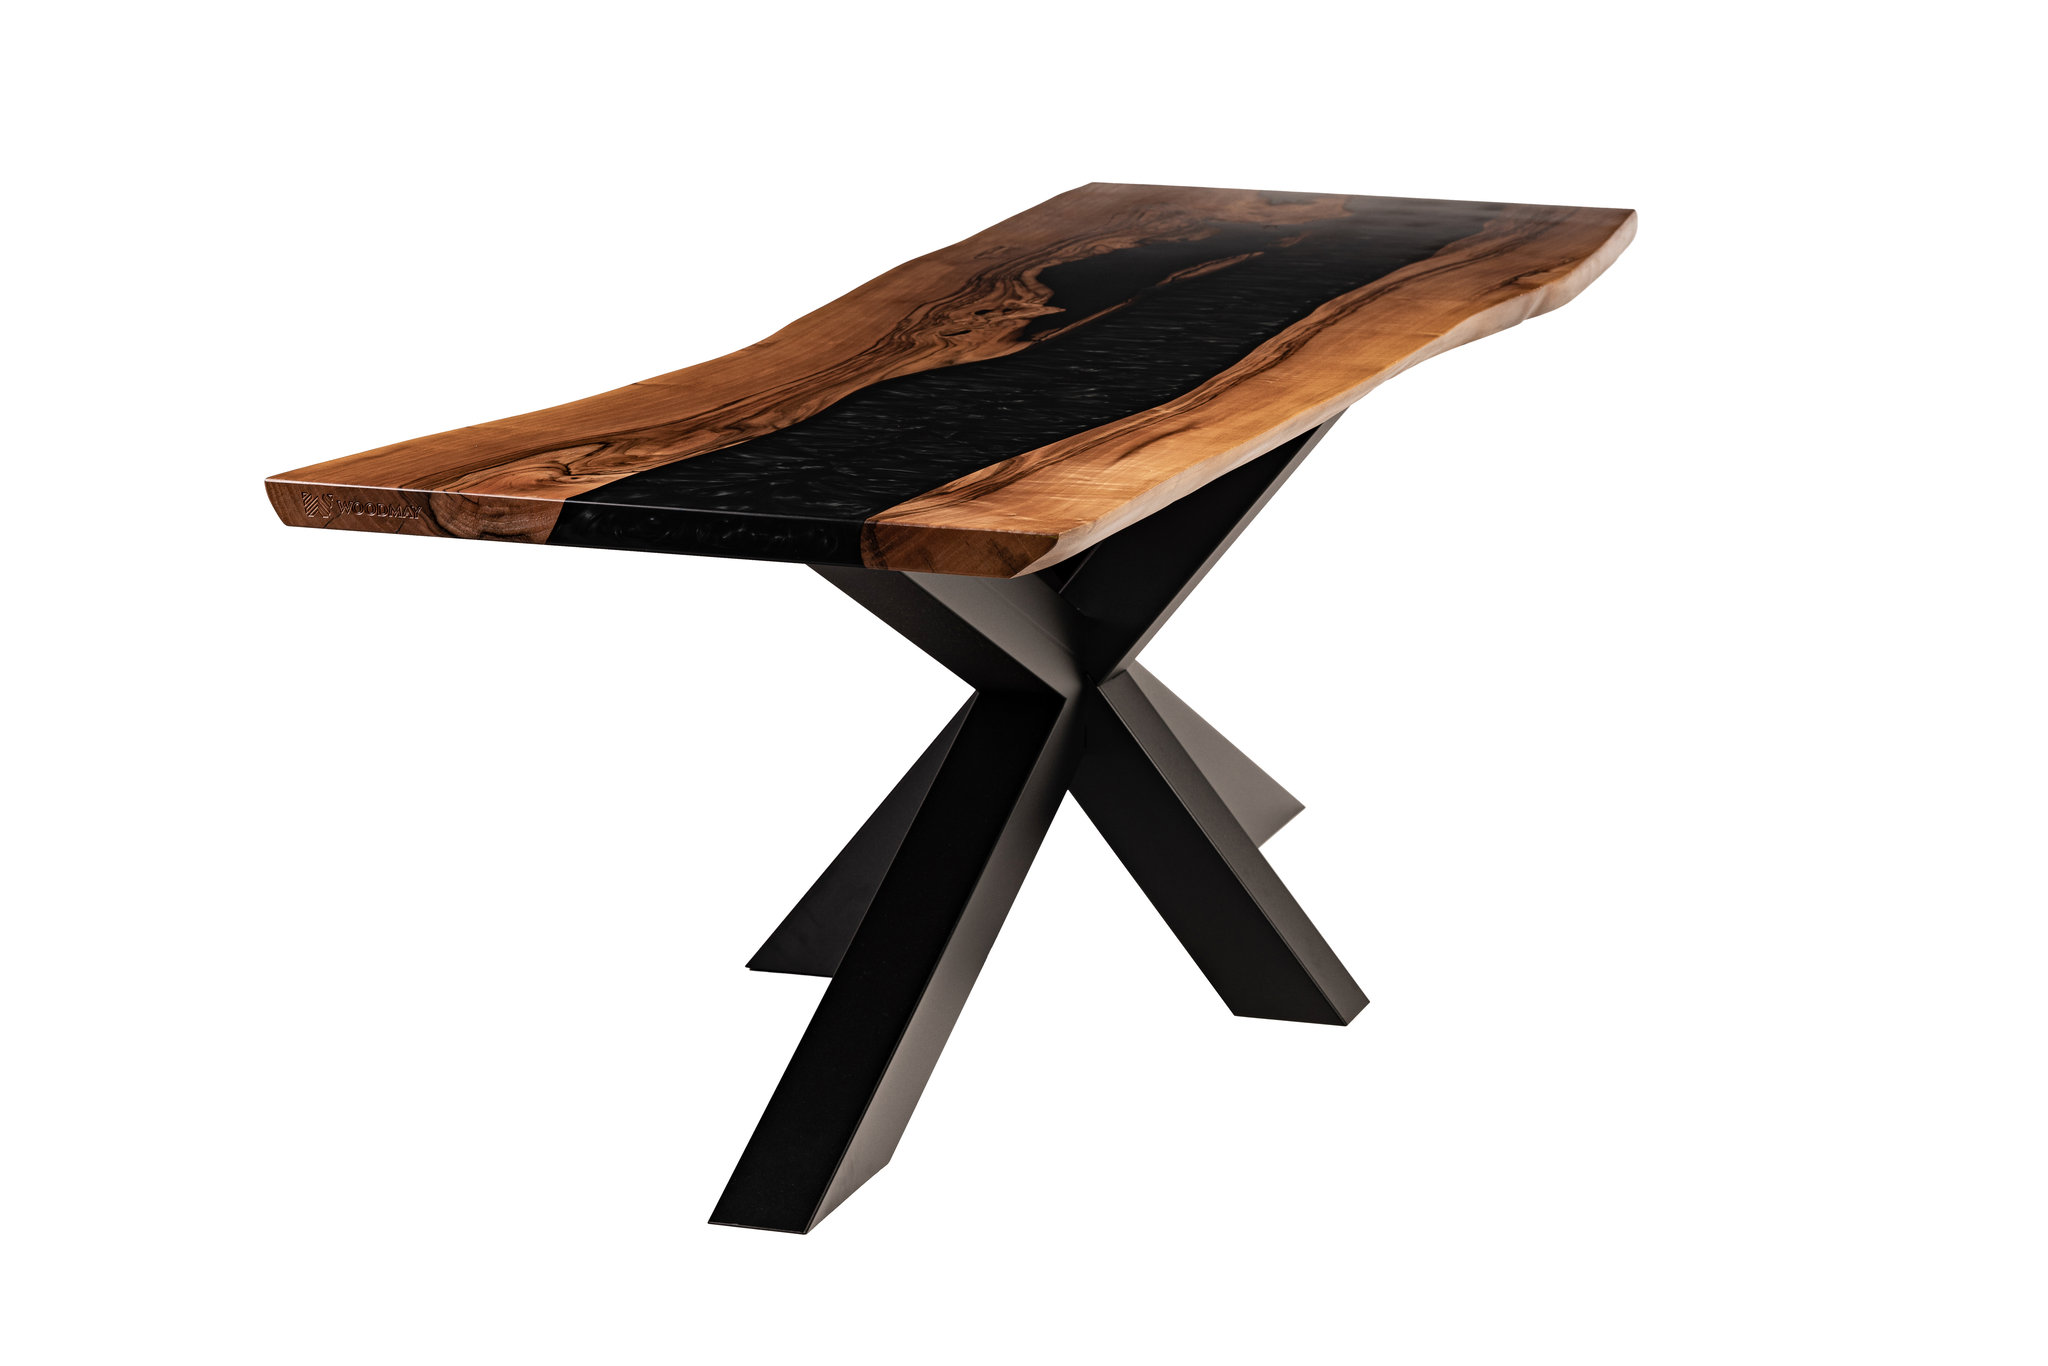 Persés dining table in solid walnut with black epoxy resin.